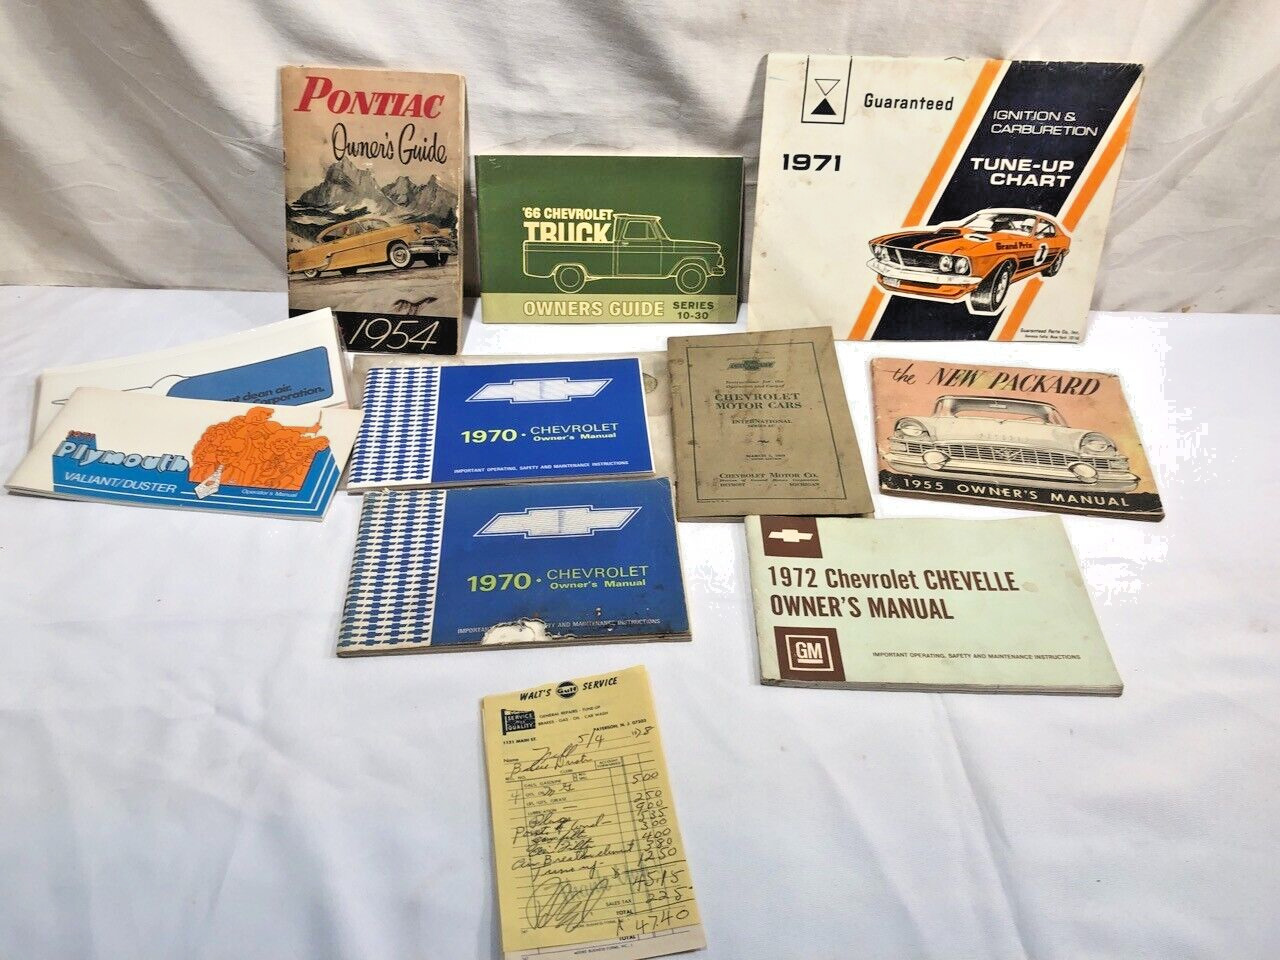 10 POUND LOT Ephemera Sale - Mixed, New & Old, by the pound, 500+ pages